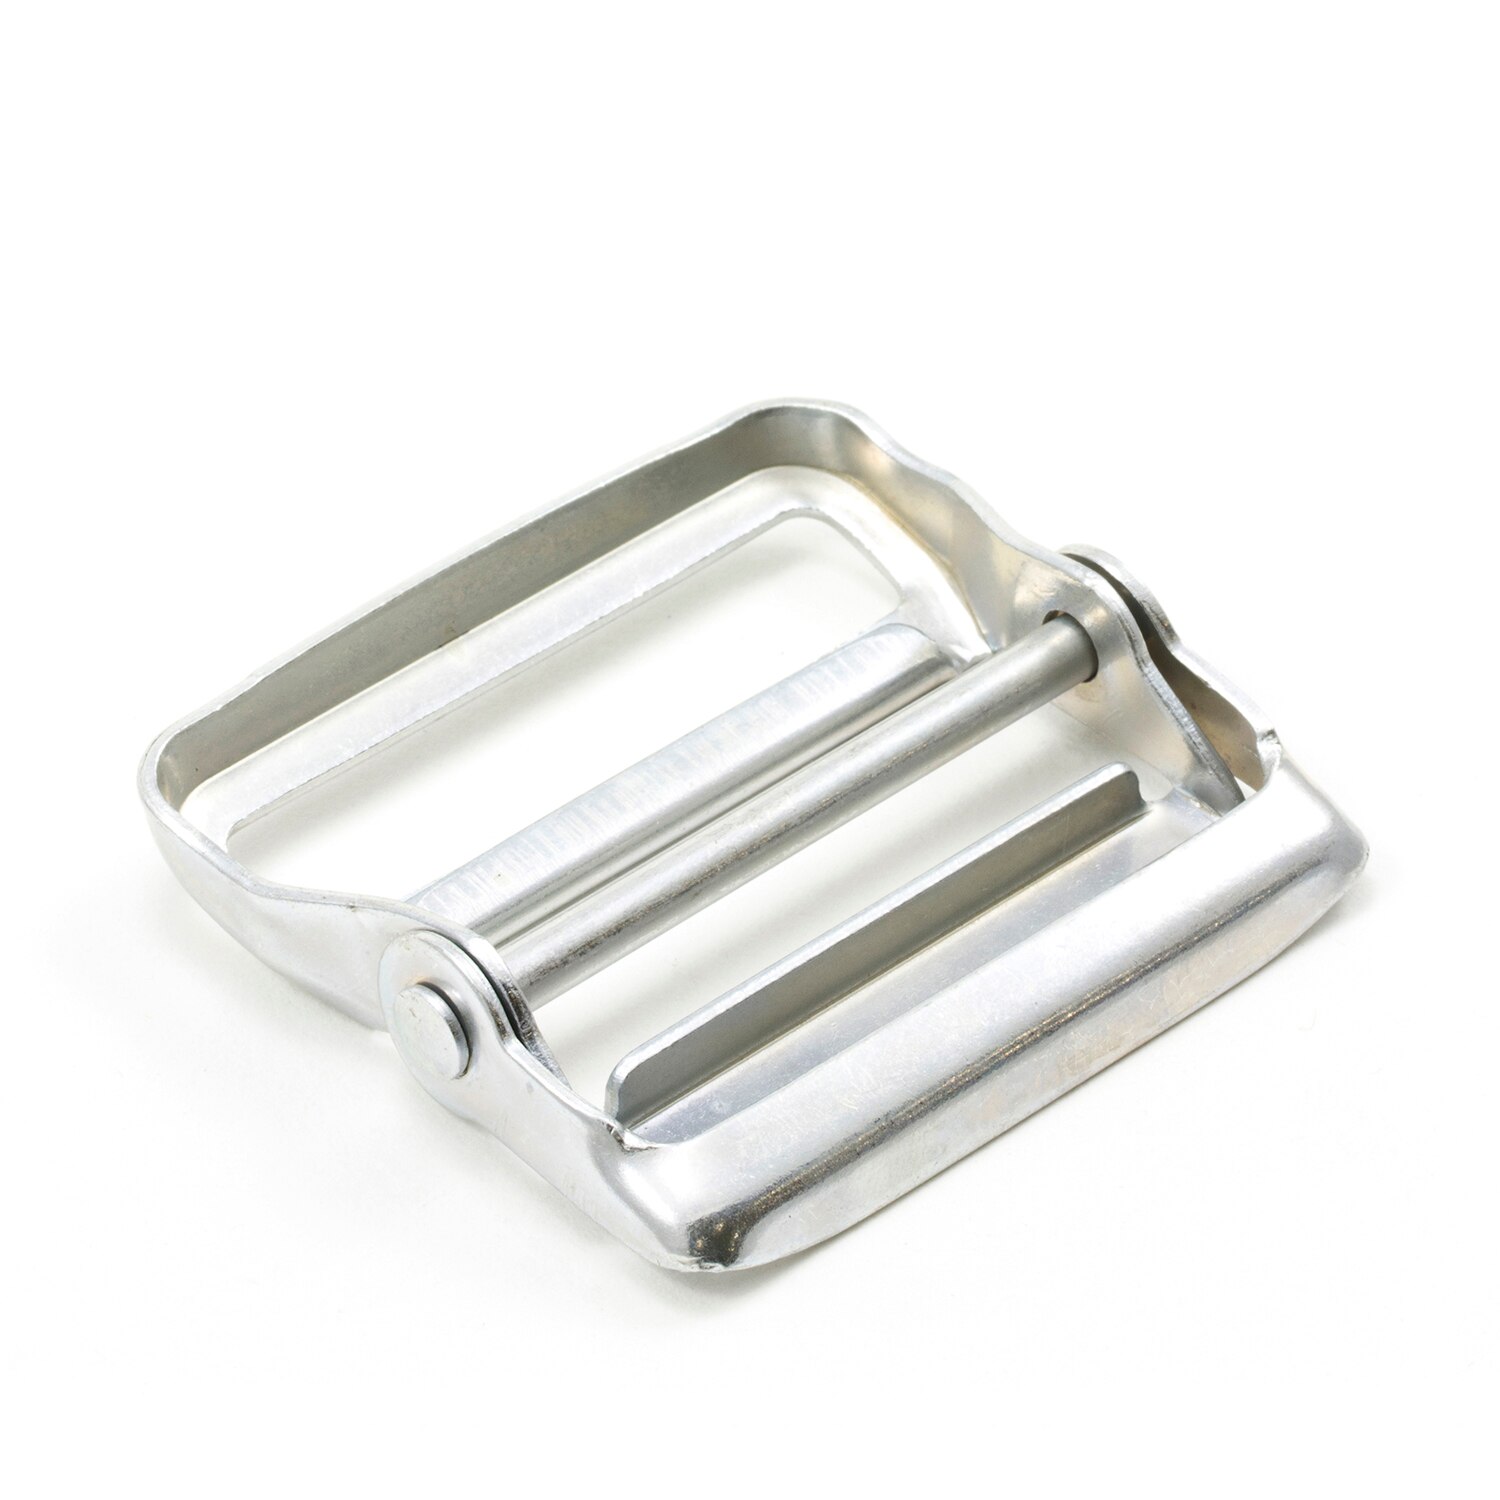 Buckle Tongueless #5270 Zinc Plated Type 1, 2 and 3 - 2